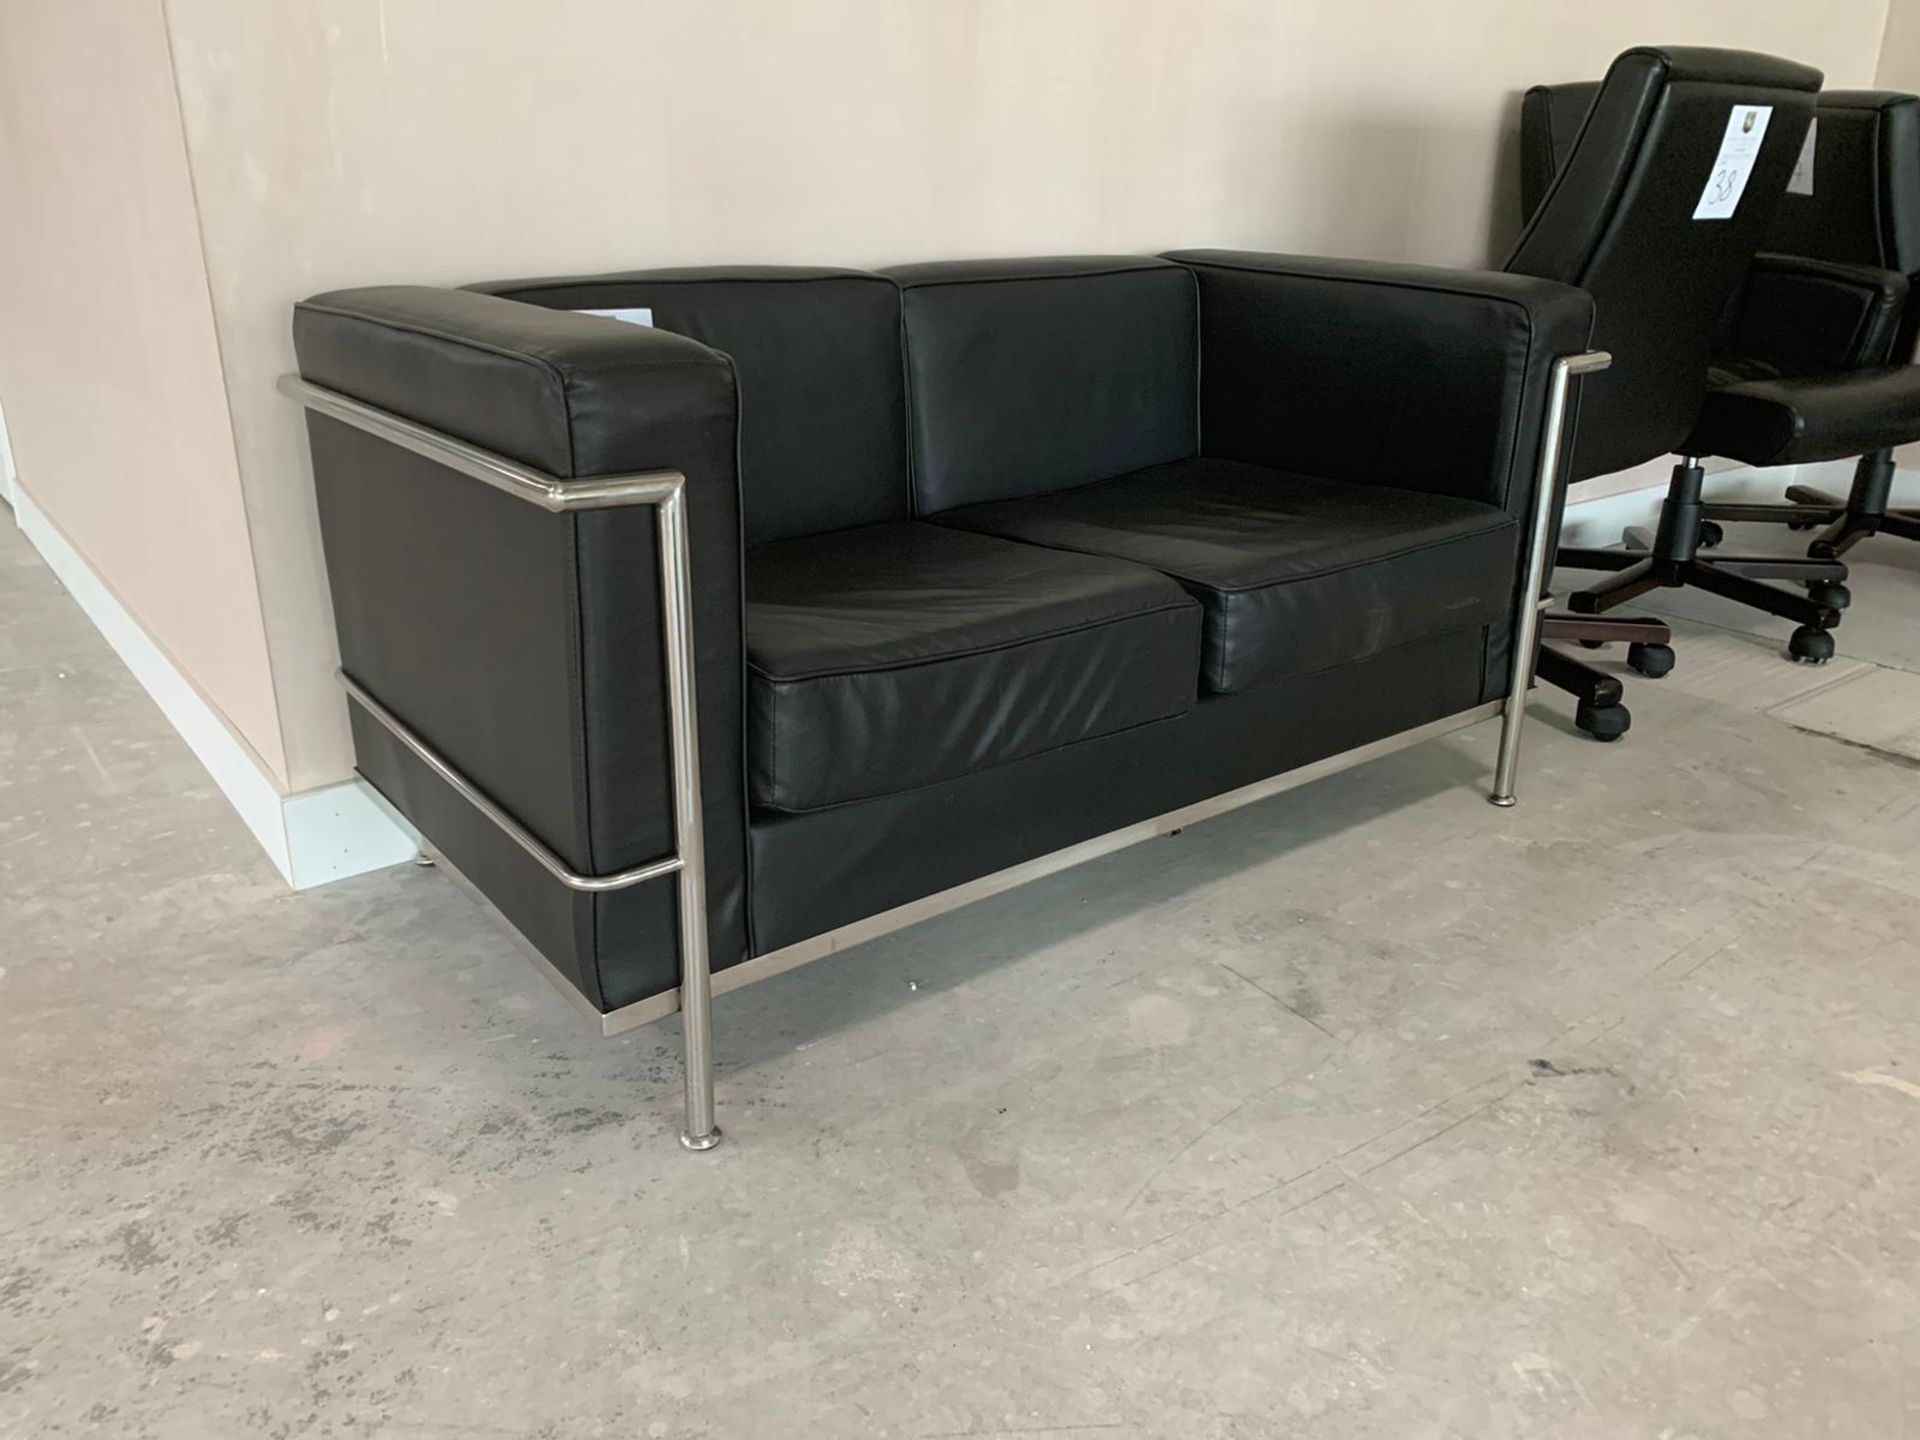 Black Leather Two Seater Sofa with Chrome Legs - Image 2 of 4